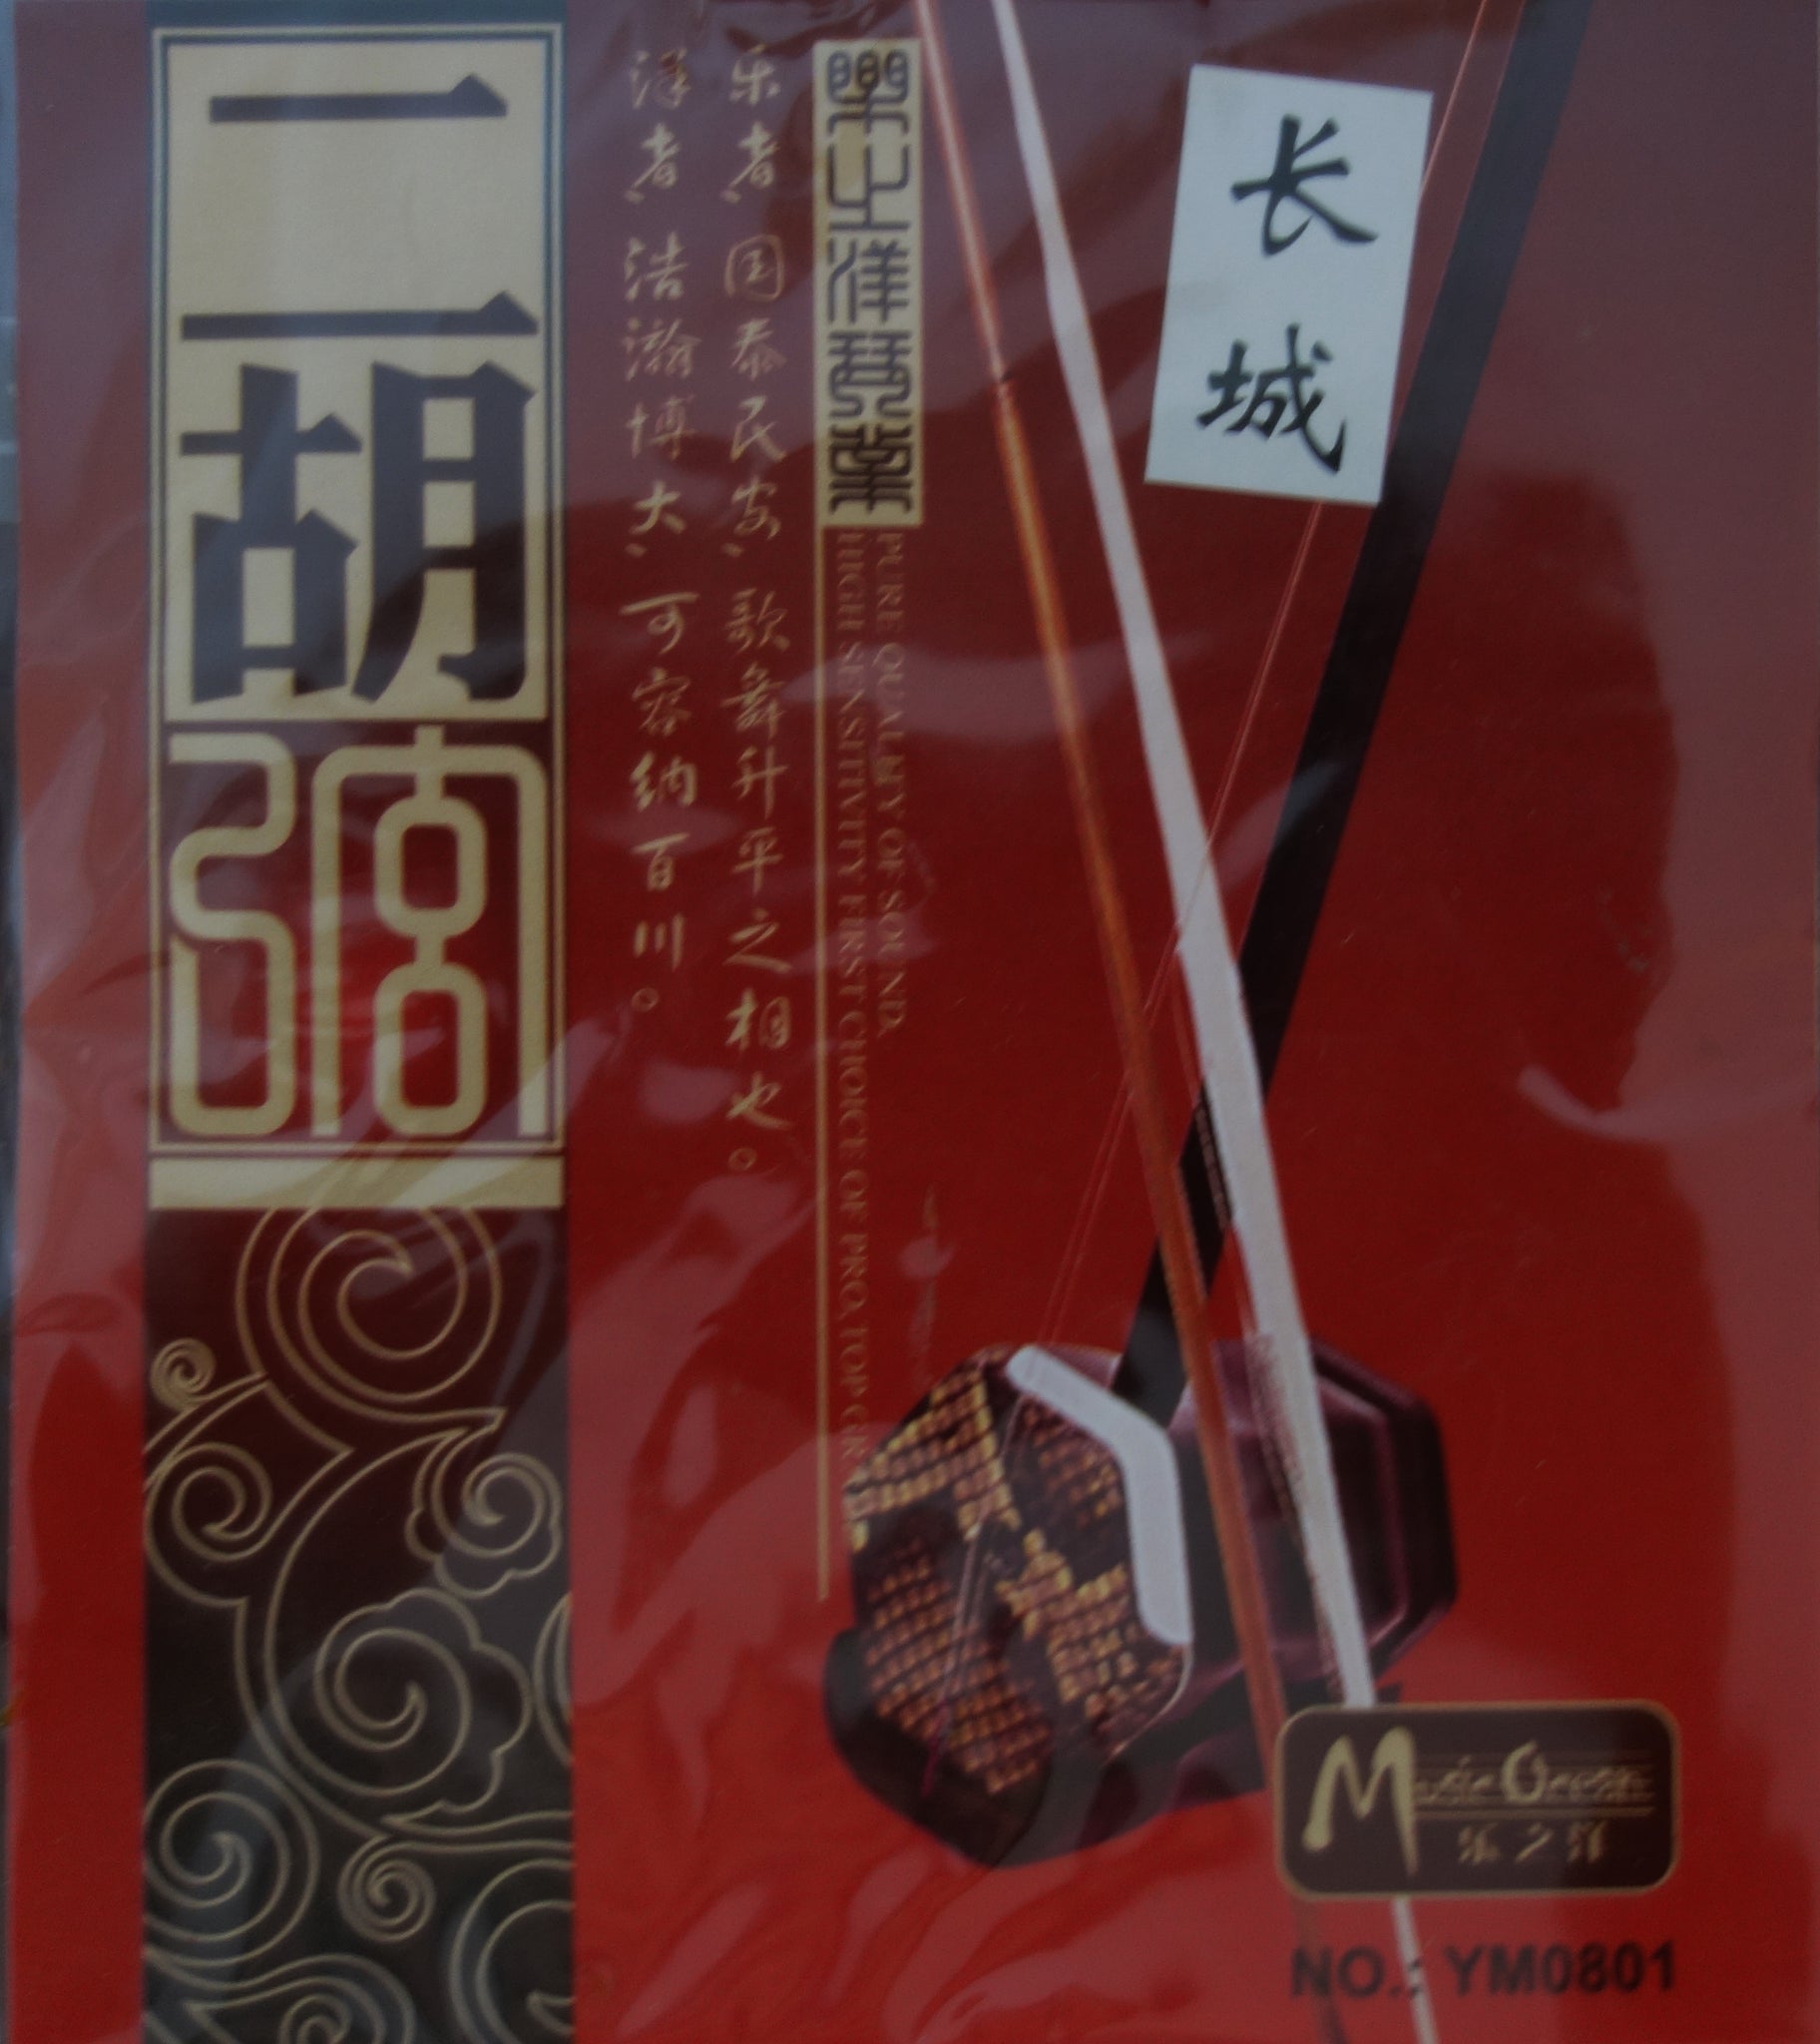 Strings for Chang-Cheng Erhu (lower pitched erhu)， a set (2 pieces) 二胡弦，“长城”二胡专用，Free shipping